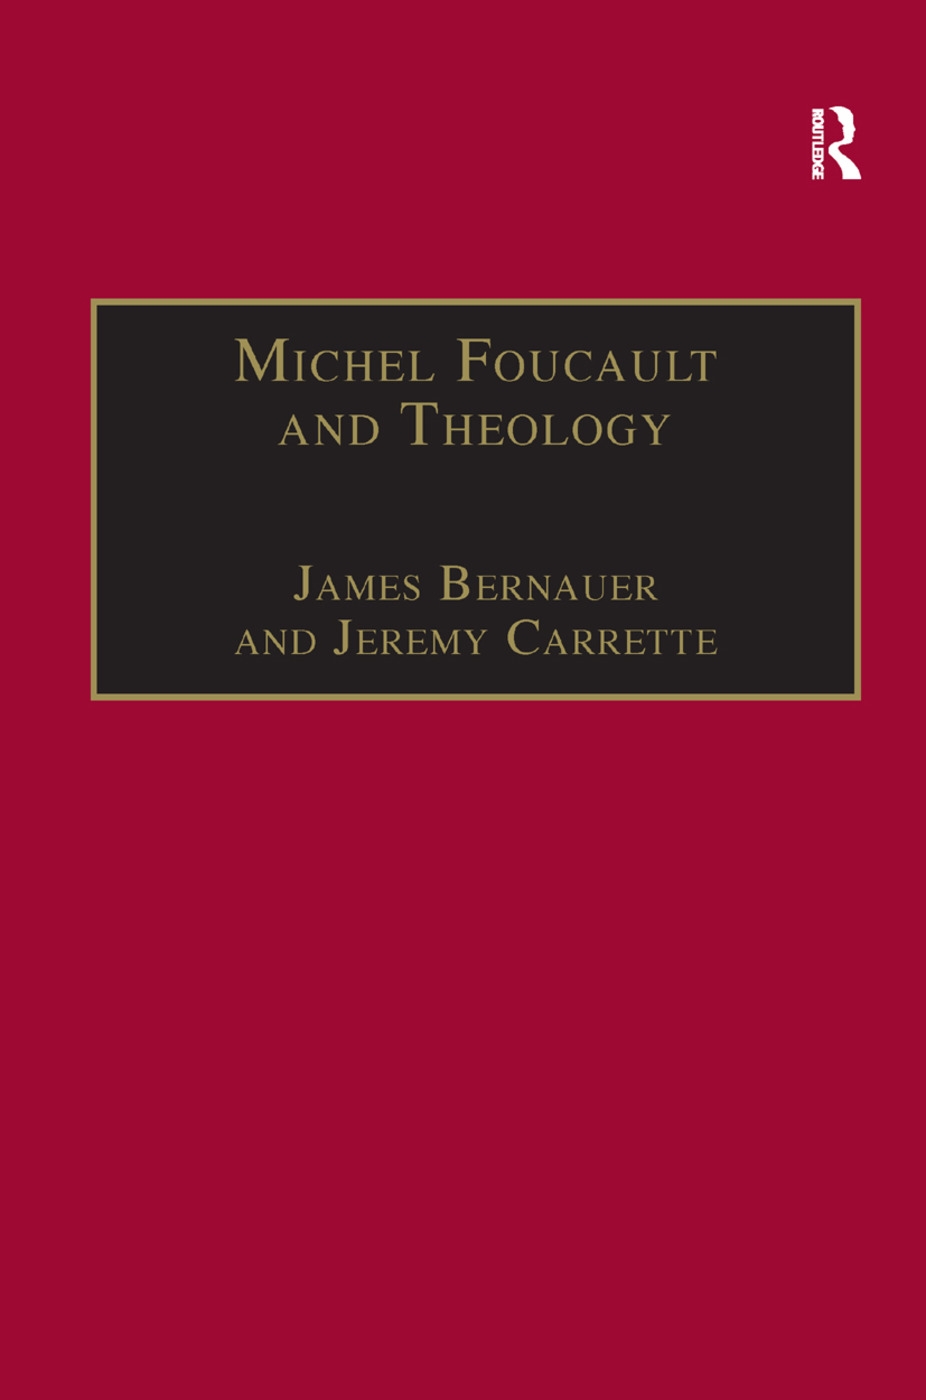 Michel Foucault and Theology: The Politics of Religious Experience